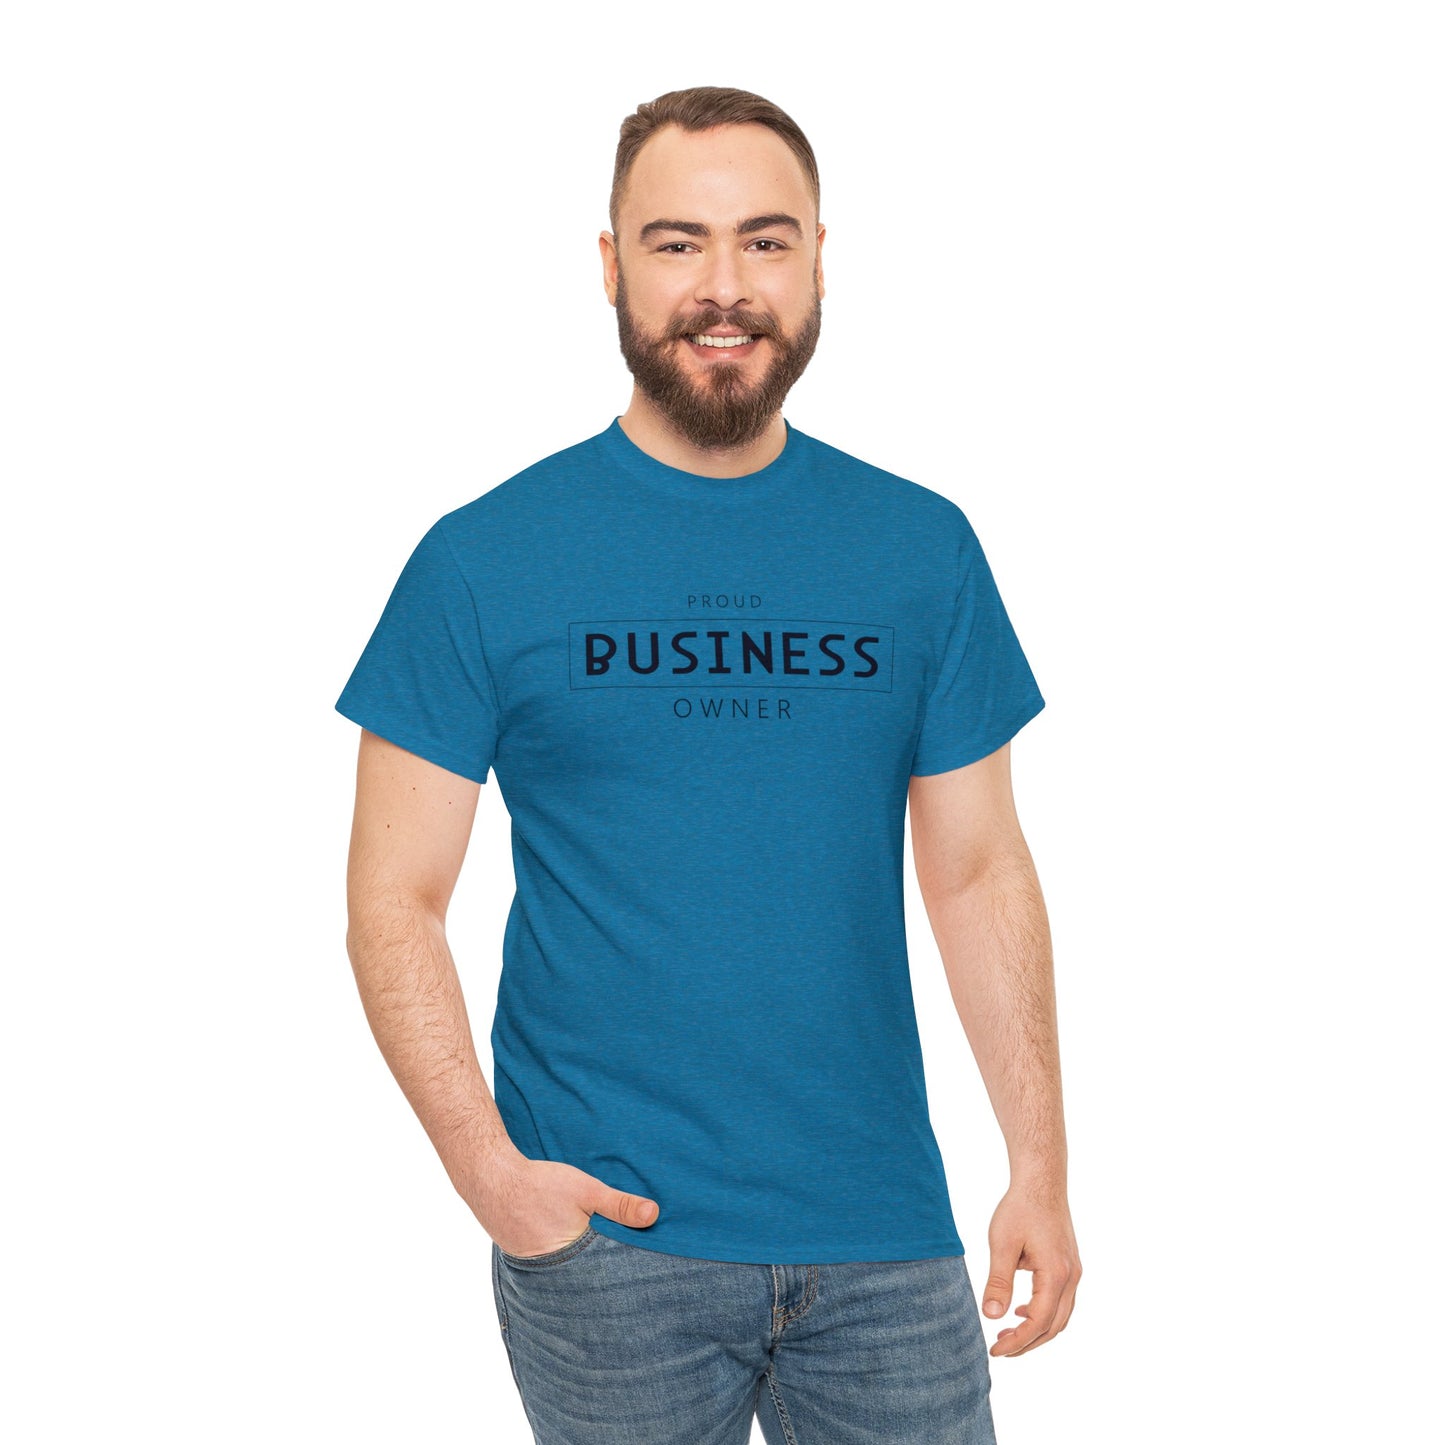 Inspirational (Proud Business Owner/ Unisex Heavy Cotton Tee)